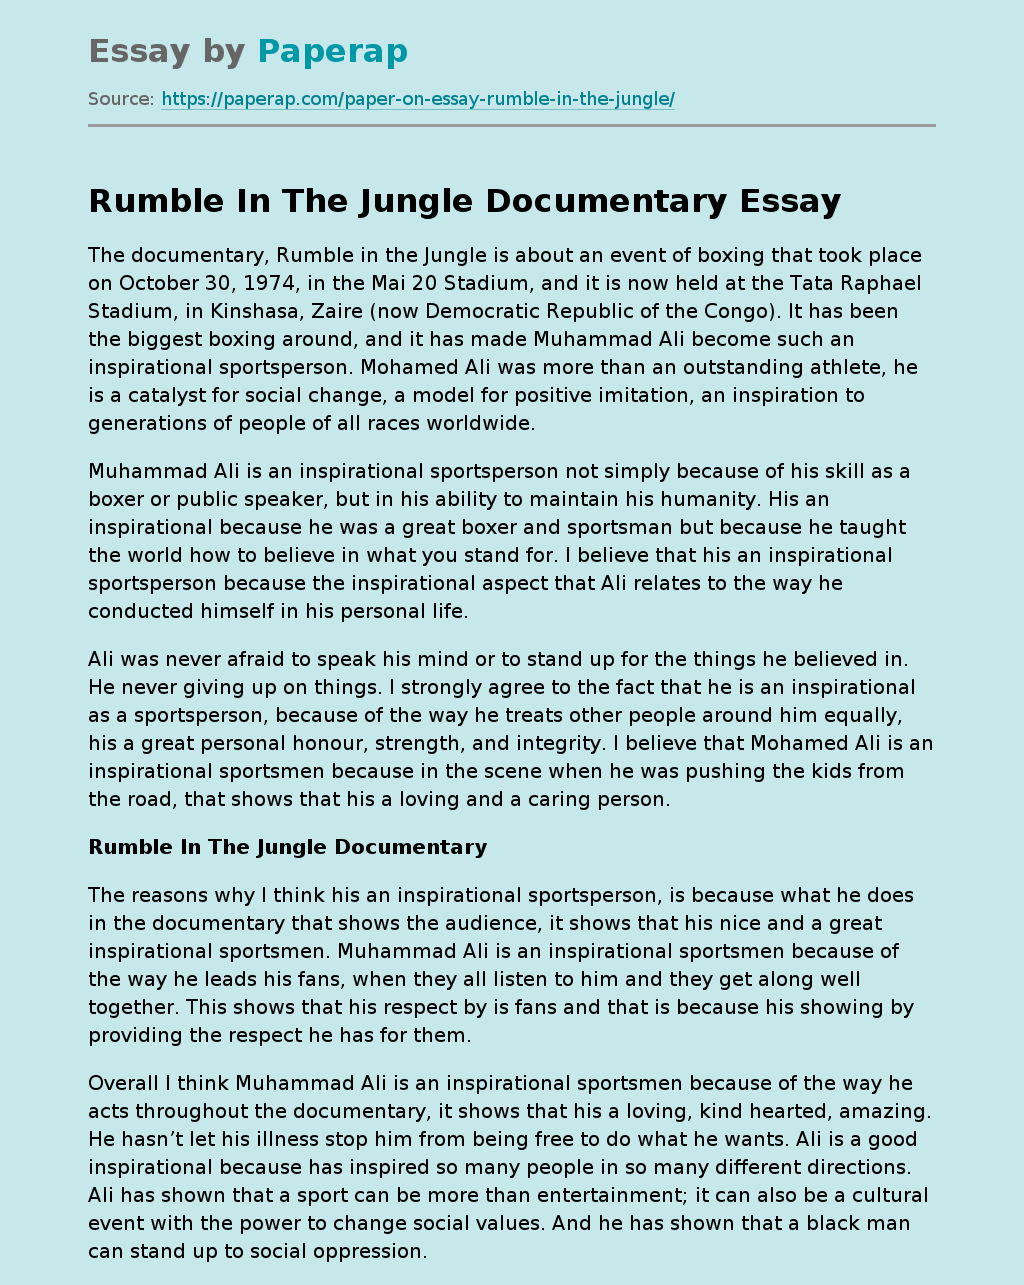 Rumble In The Jungle Documentary